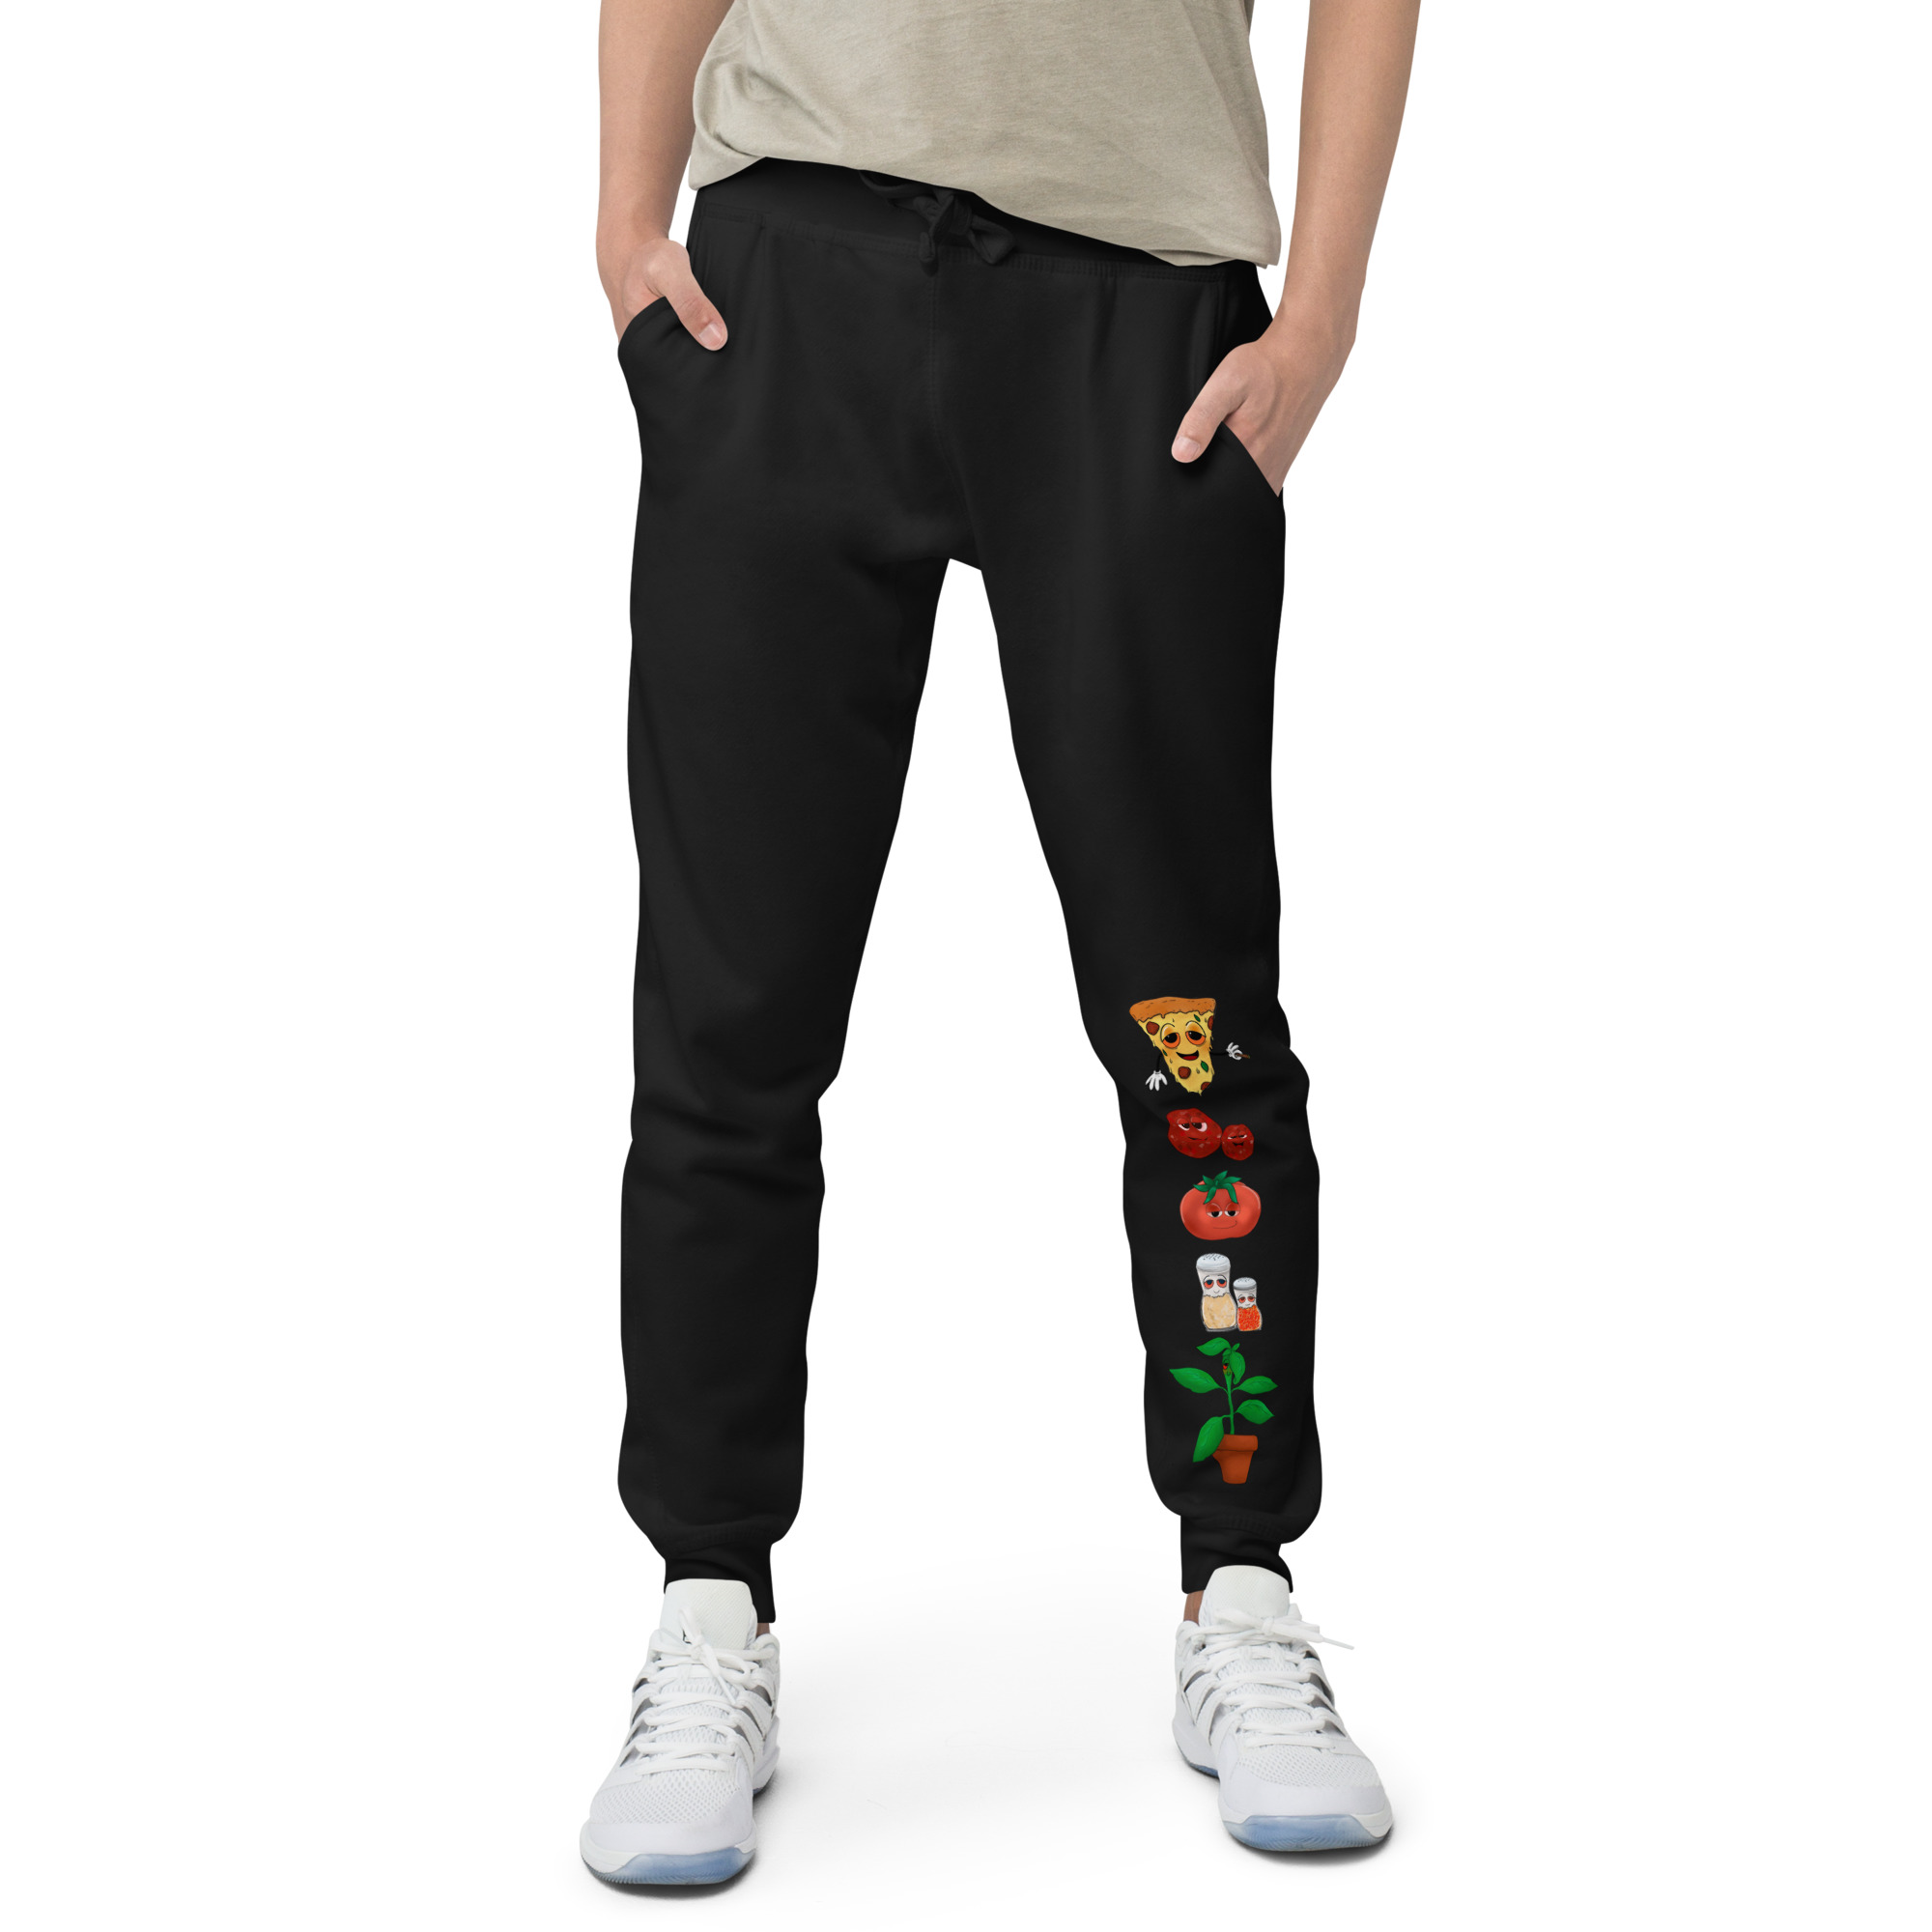 Ricky and Friends Sweatpants